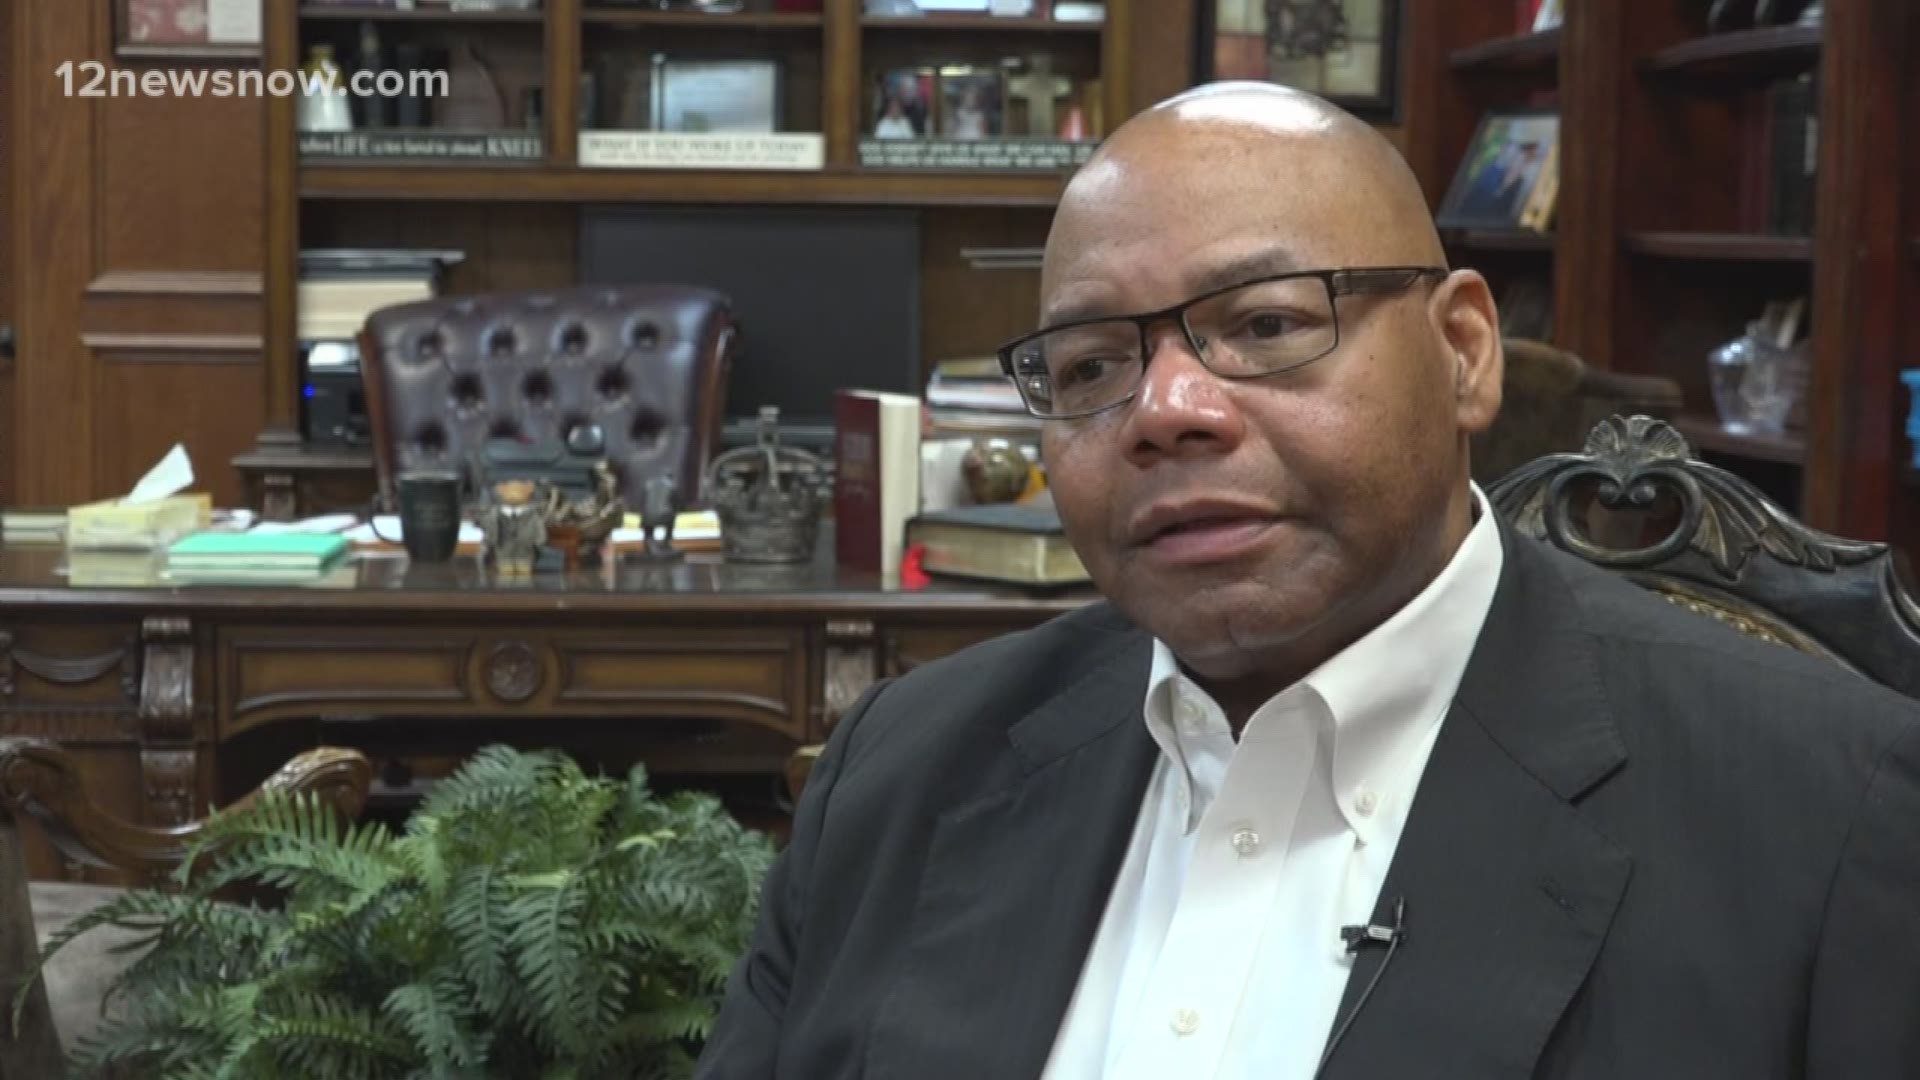 In honor of Black History Month, 12news reporter Rachel Keller sits down with John Adolph of Antioch Missionary Baptist Church to discuss his passion for ministry and service.